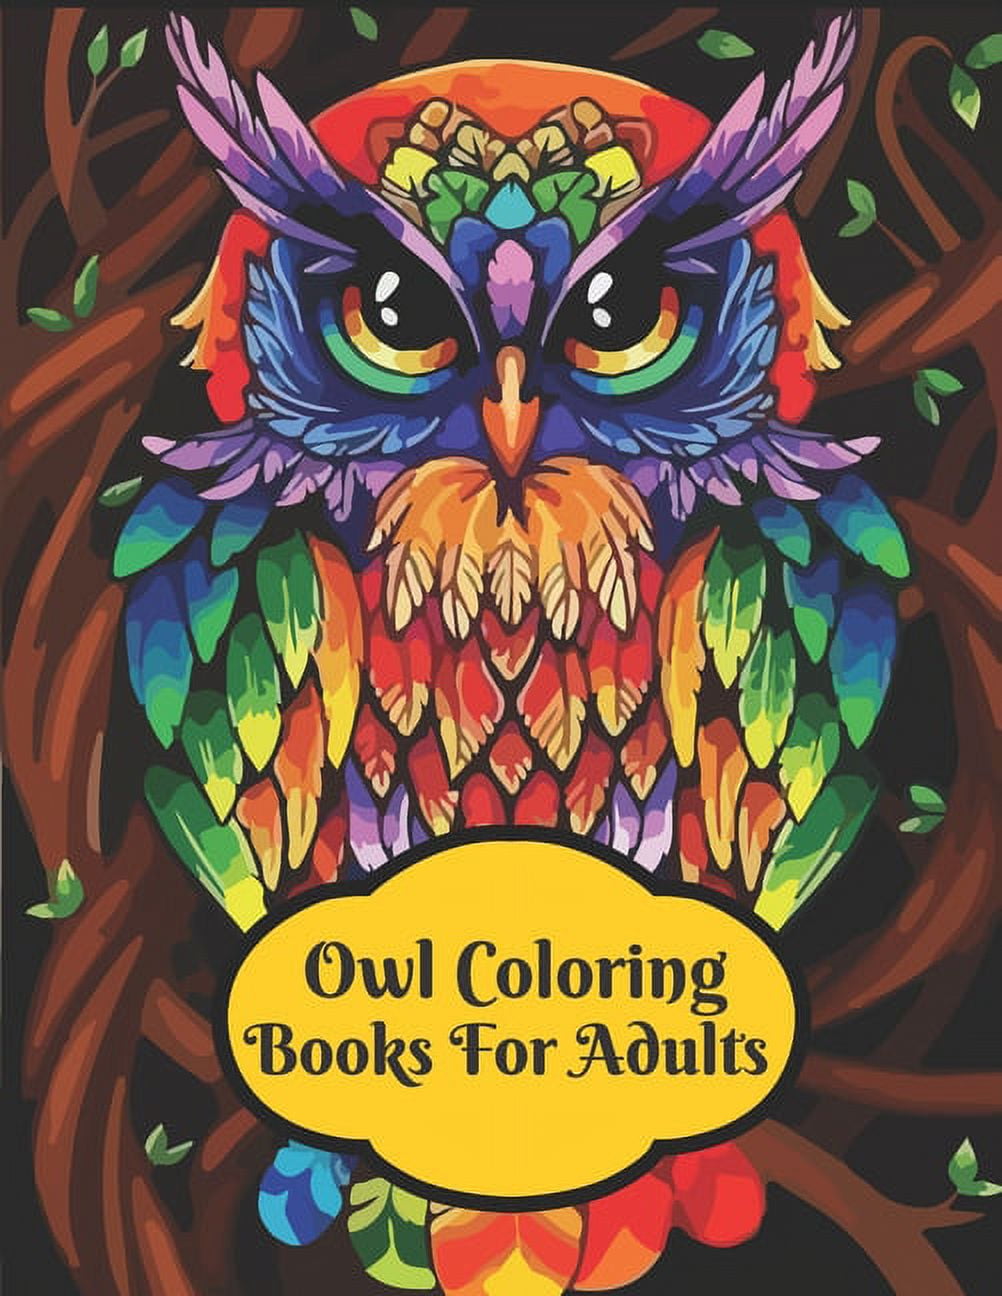 Owl coloring books for adults an adult coloring book with fun owl designs fun and easy coloring pages paperback